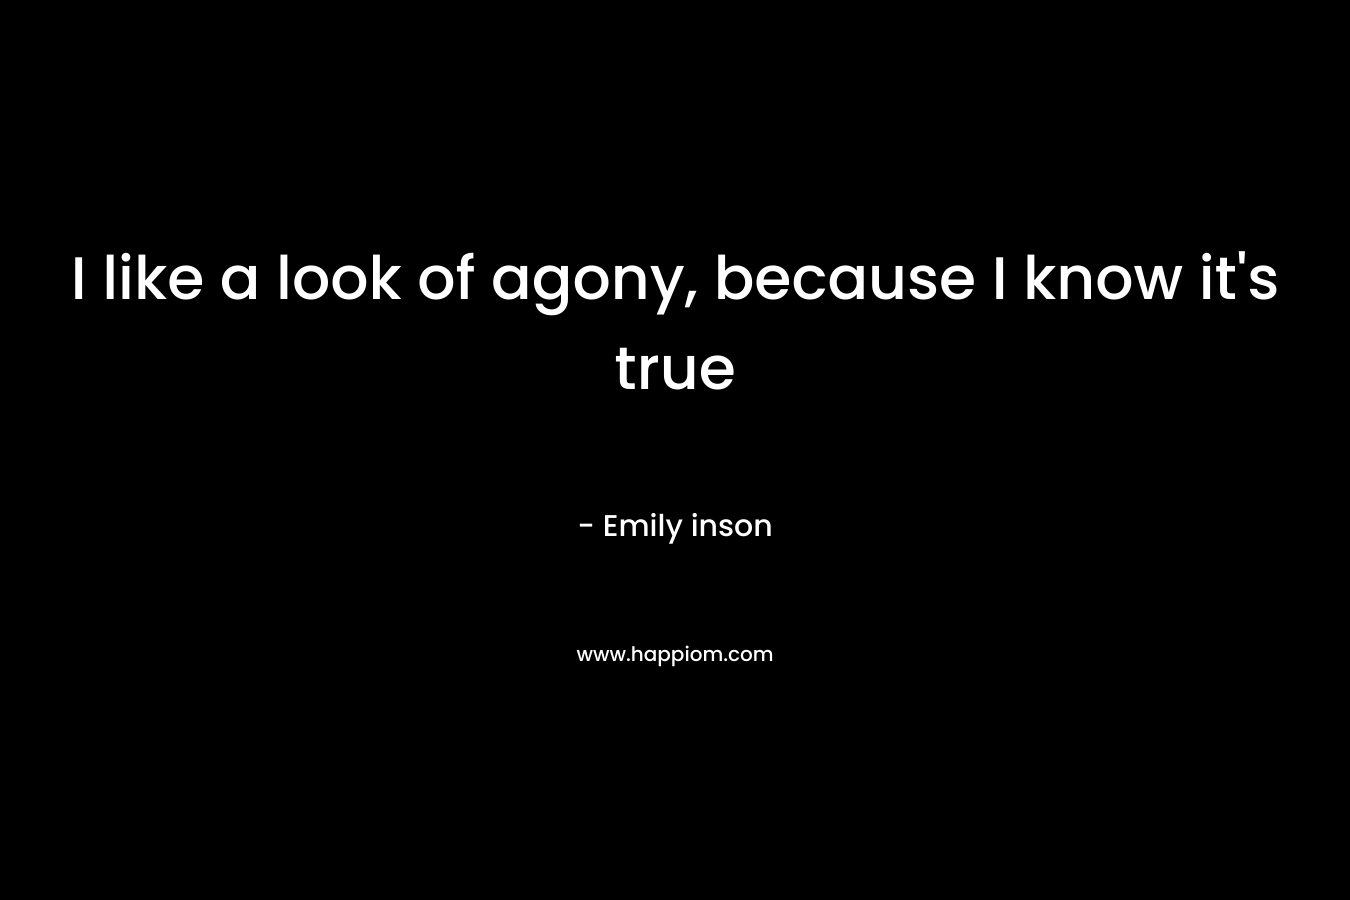 I like a look of agony, because I know it’s true – Emily inson